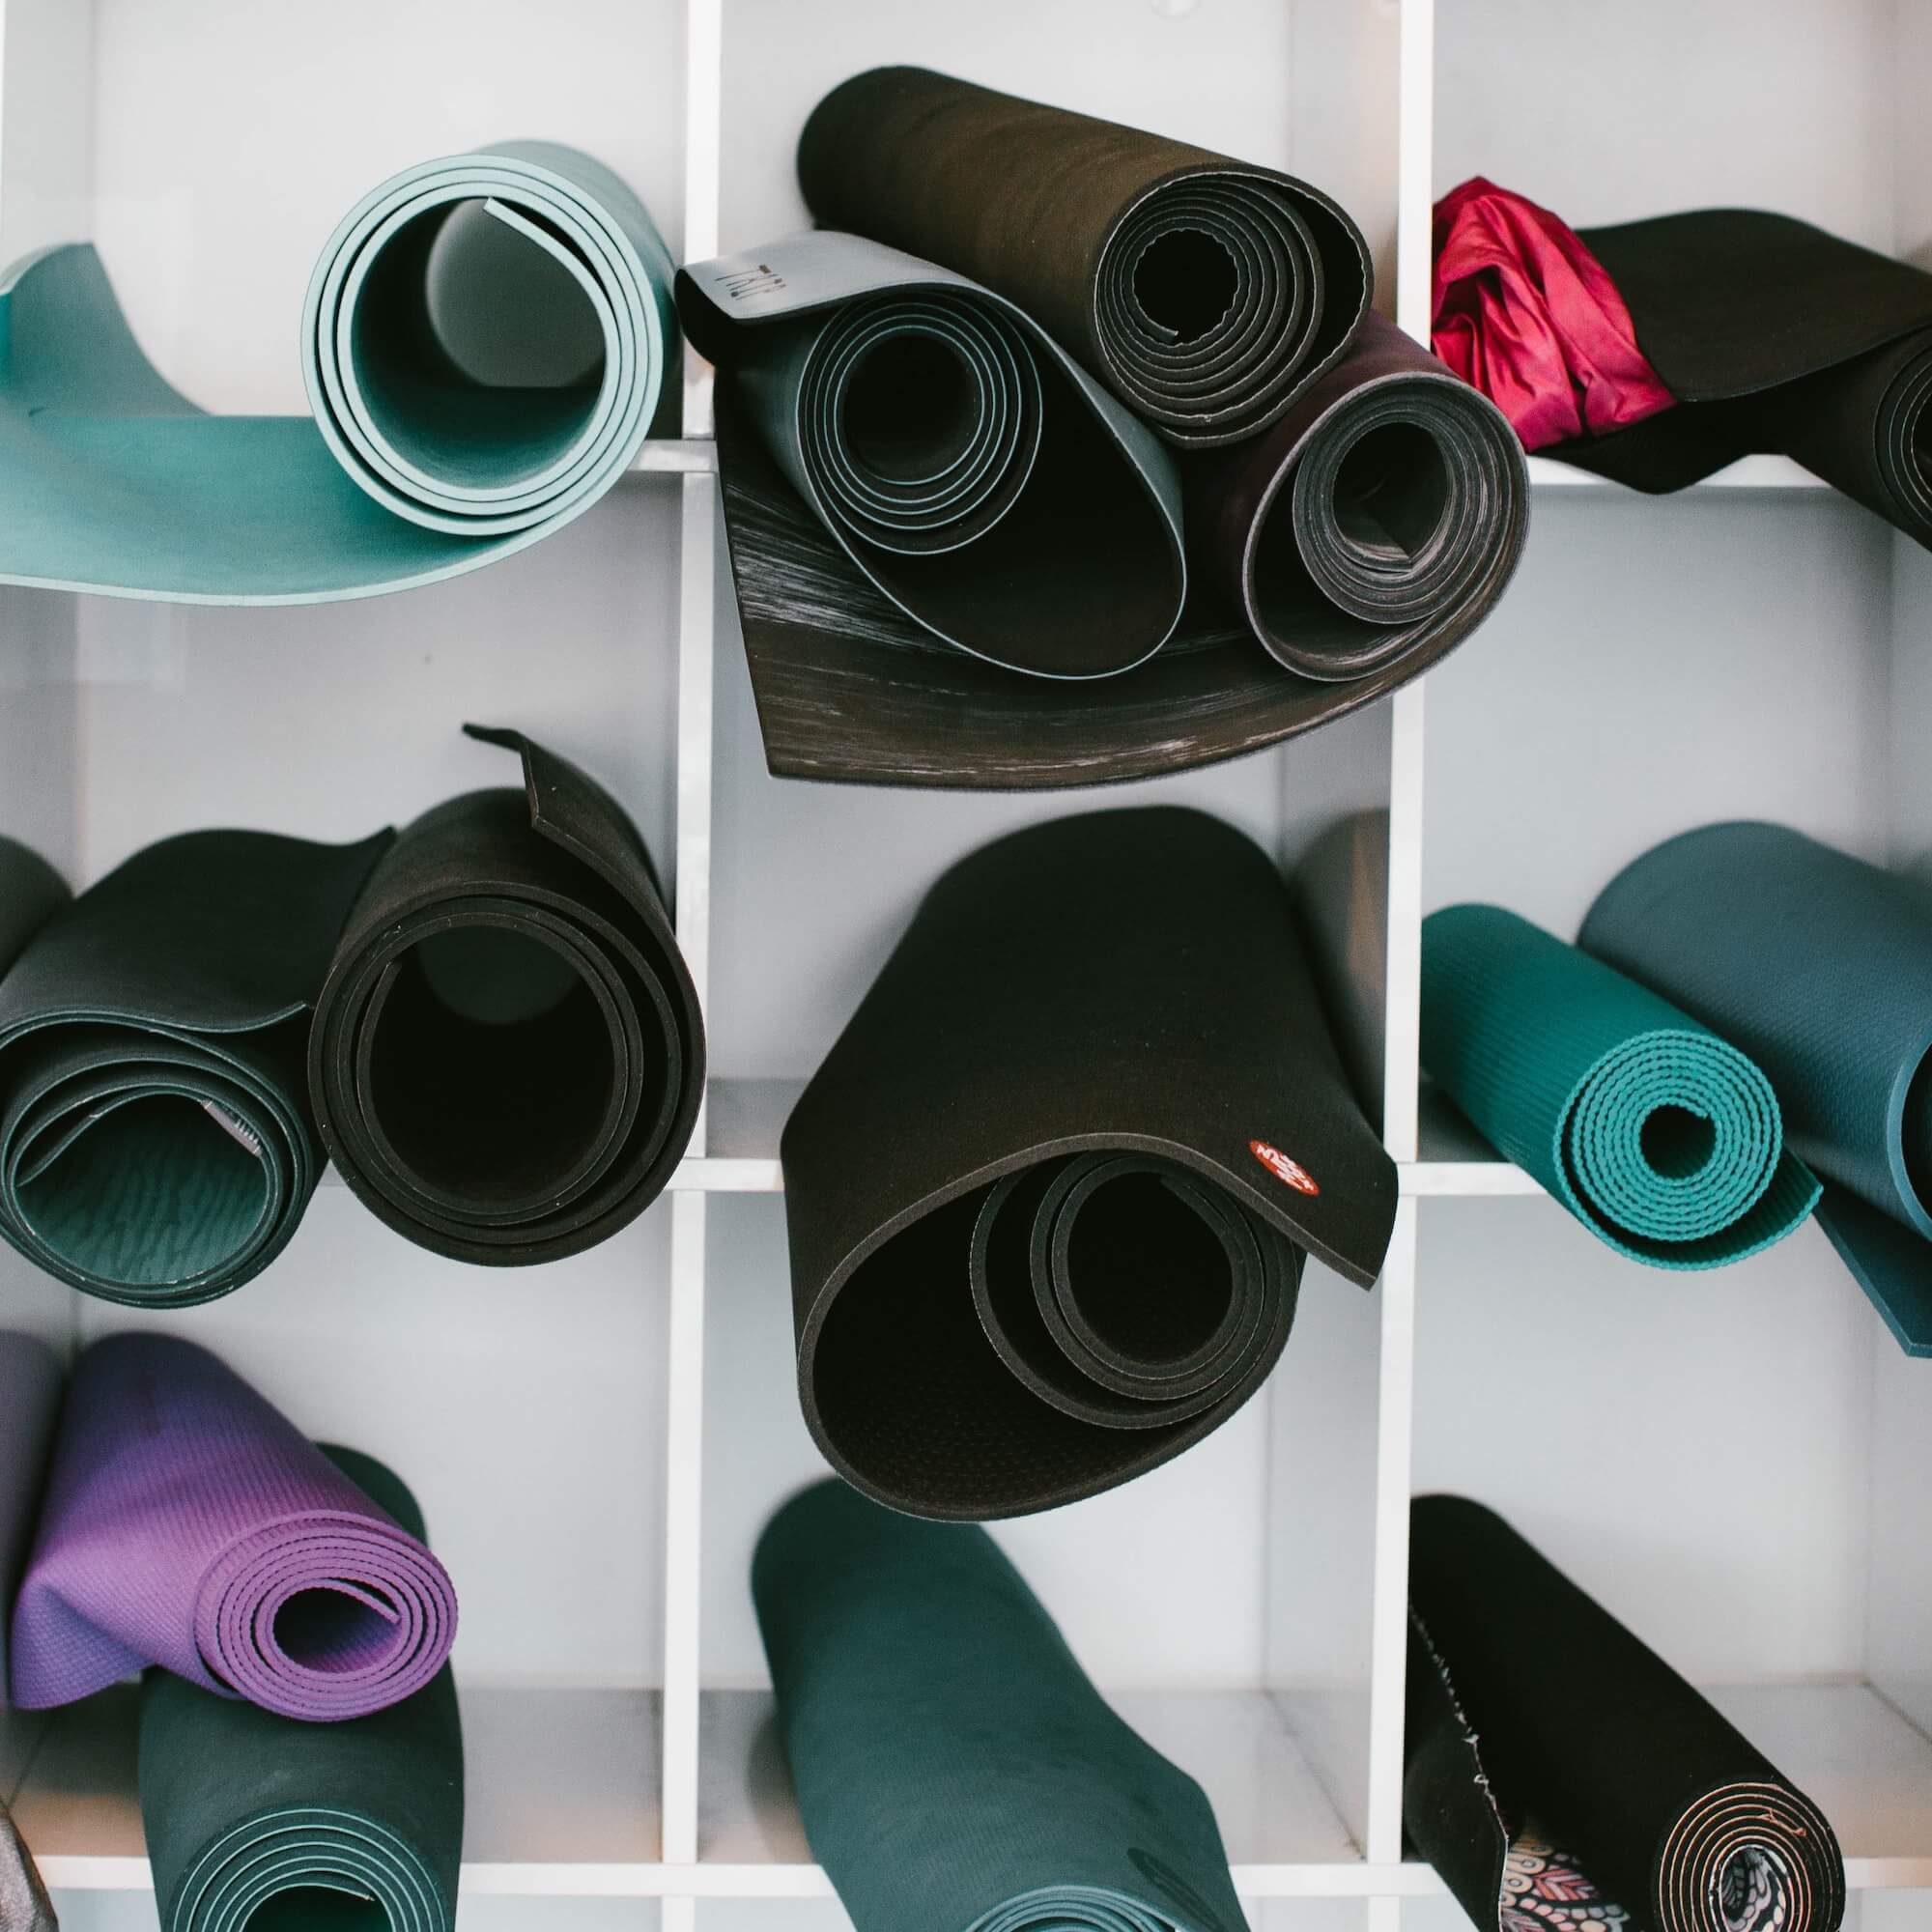 White shelving unit with a variety of rolled yoga mats in different colors